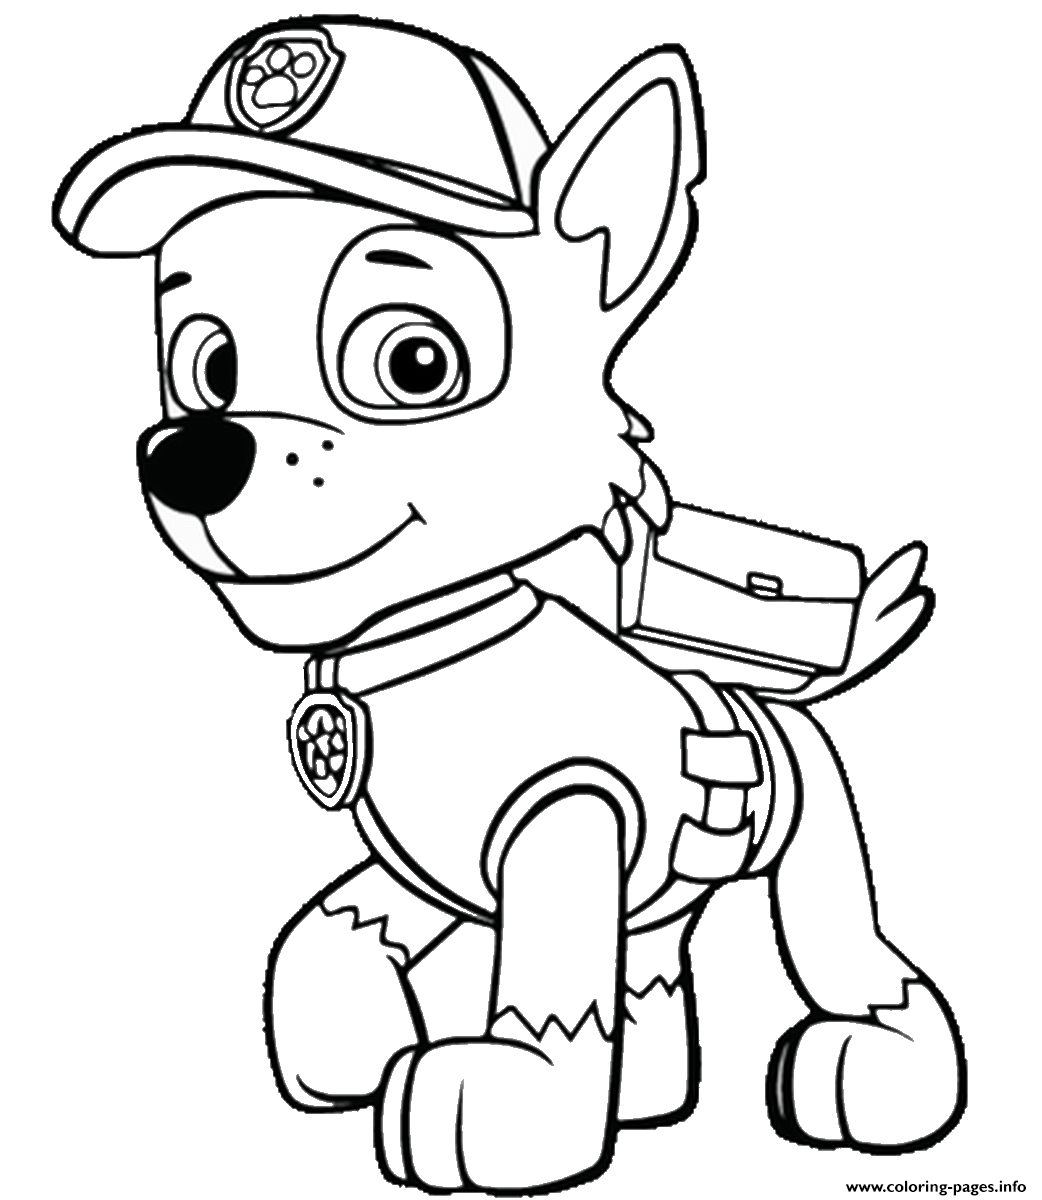 Free Paw Patrol Coloring Pages - Happiness Is Homemade - Free Printable Paw Patrol Coloring Pages